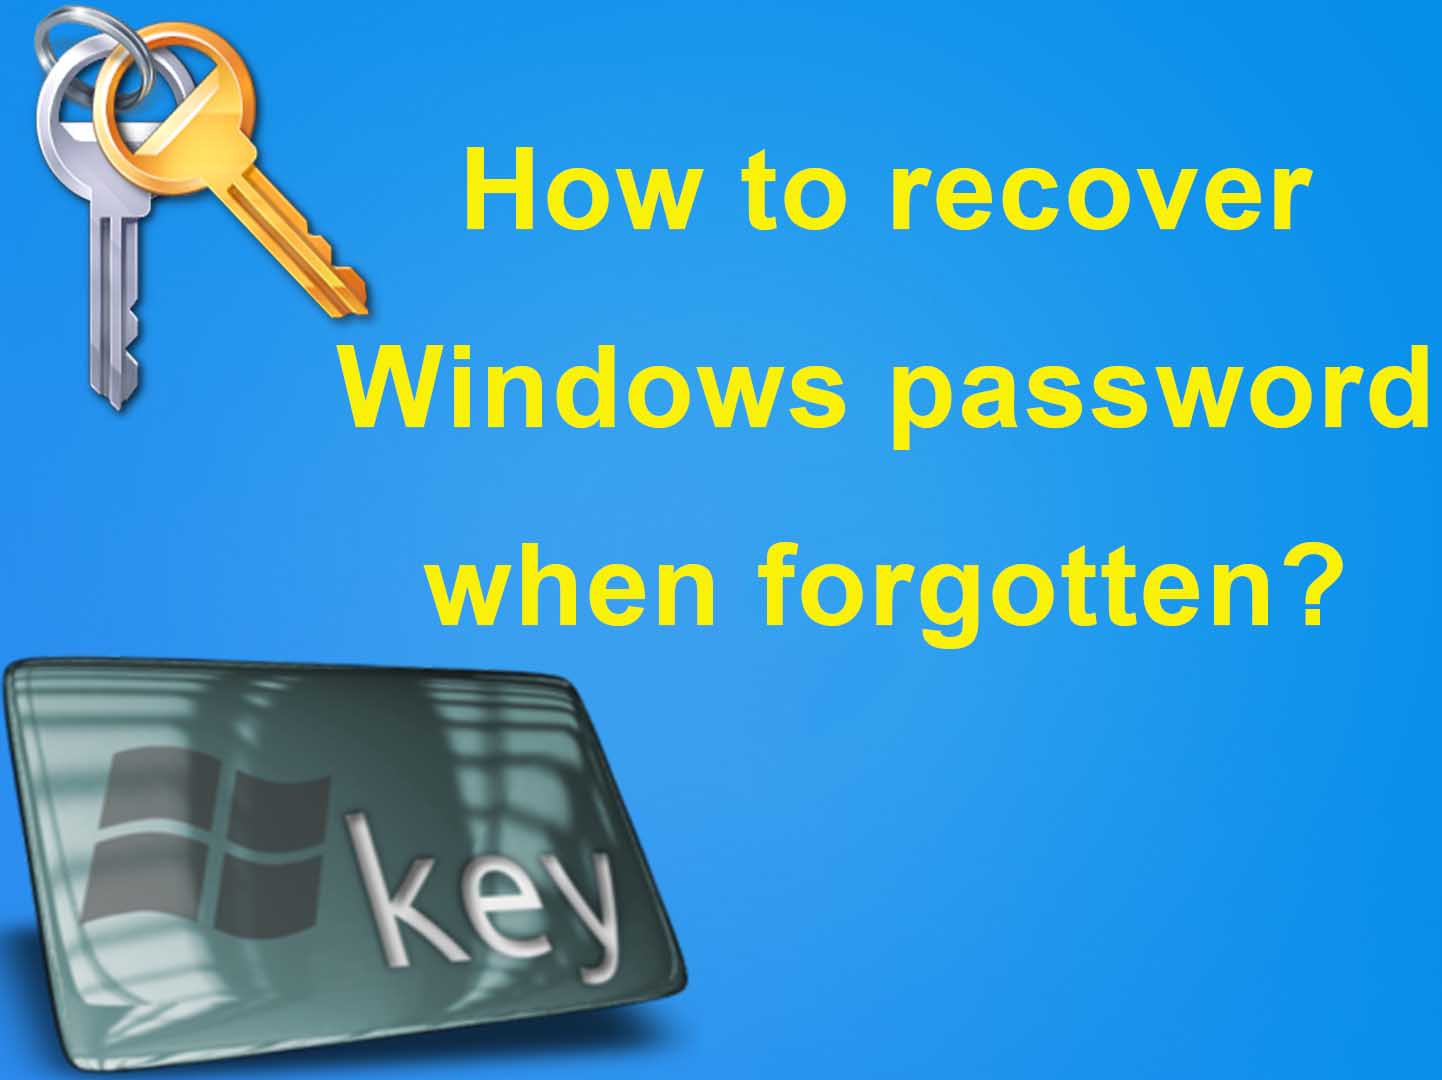 How to recover Windows password when forgotten?